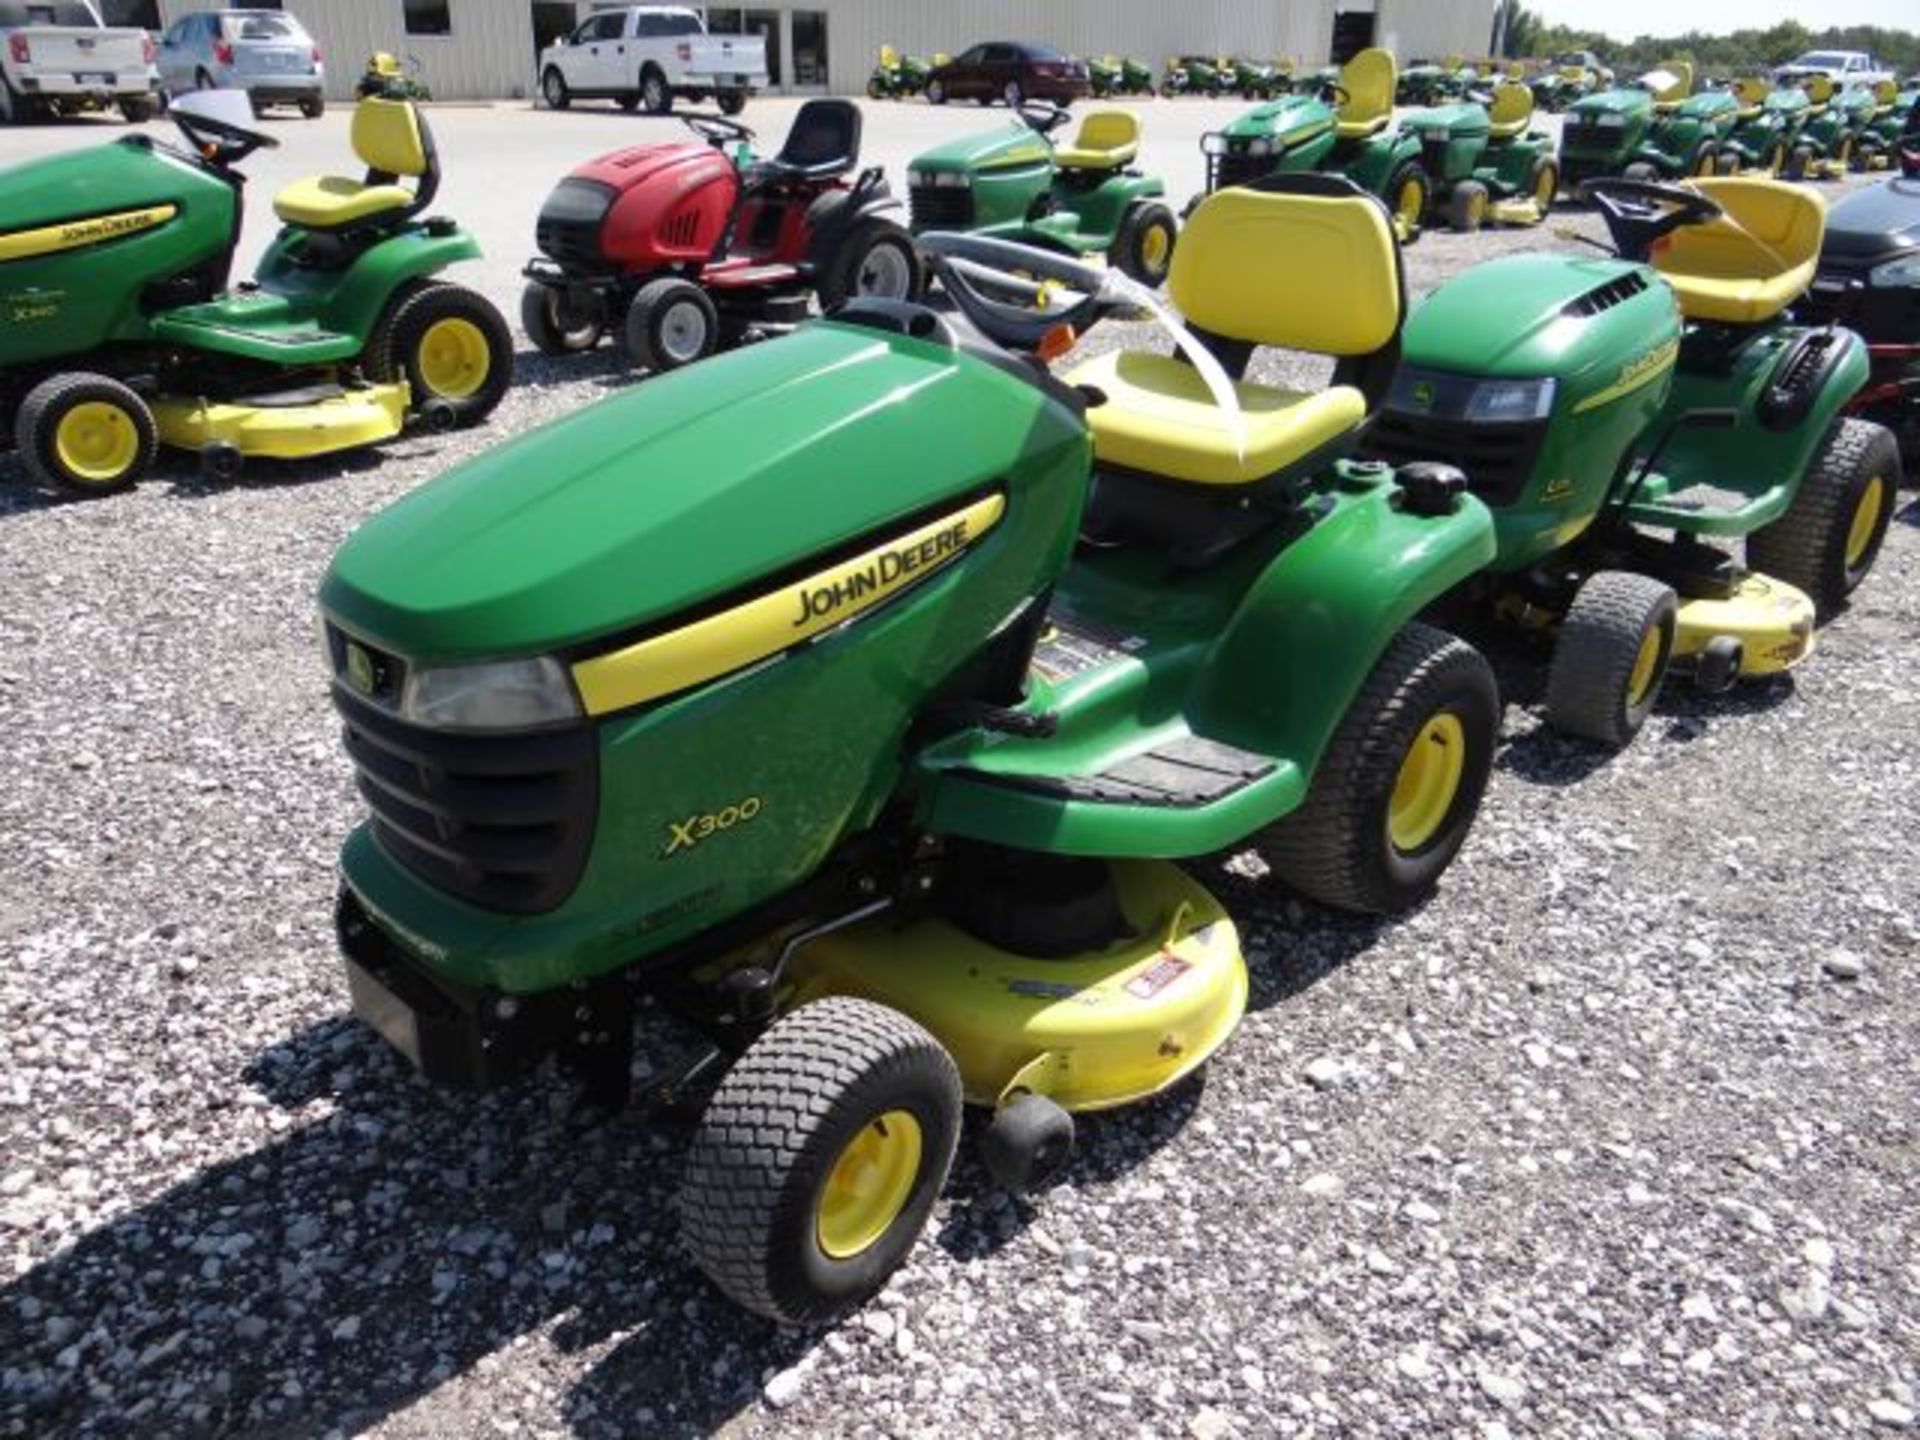 2007 JD X300 Mower 341 hrs, 17hp Kawasaki, V-Twin, Air Cooled, Hydro, w/ 42" Deck and 44" Front - Image 2 of 3